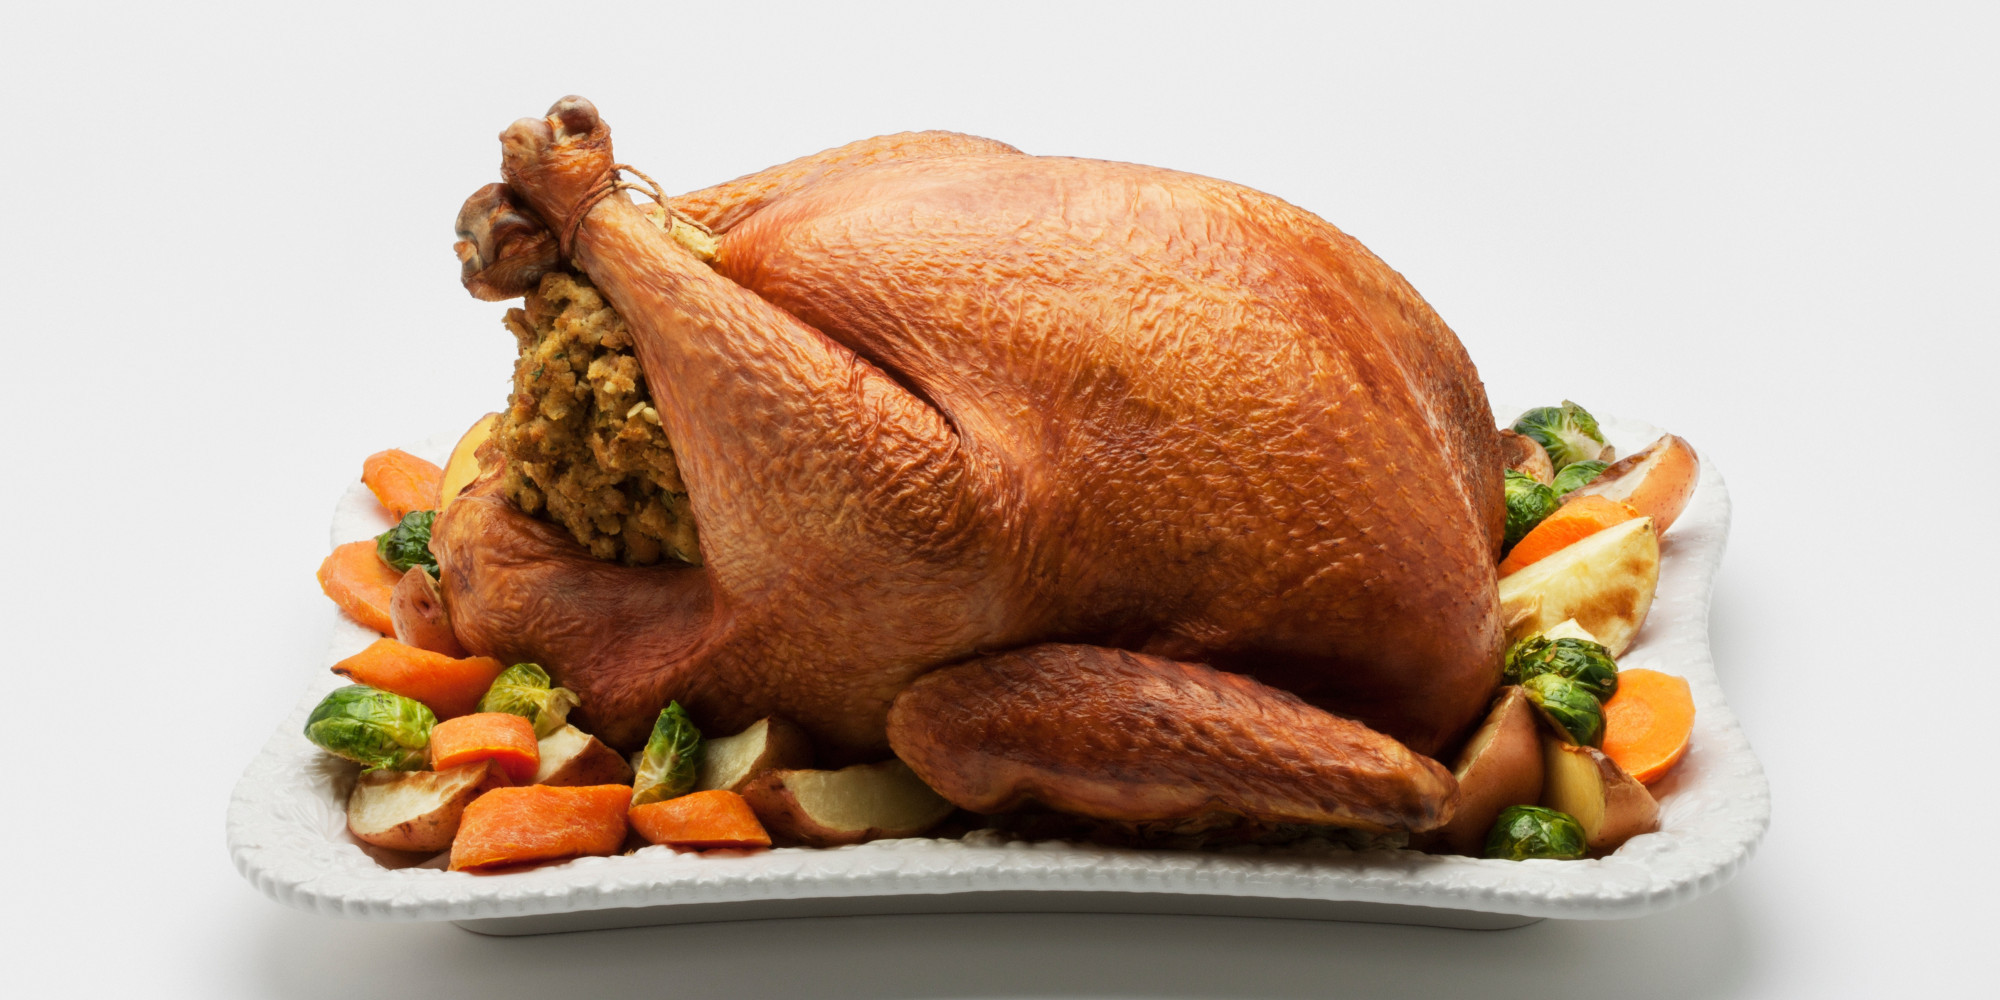 Thanksgiving Turkey Picture
 Tryptophan Making You Sleepy Is A Big Fat Lie